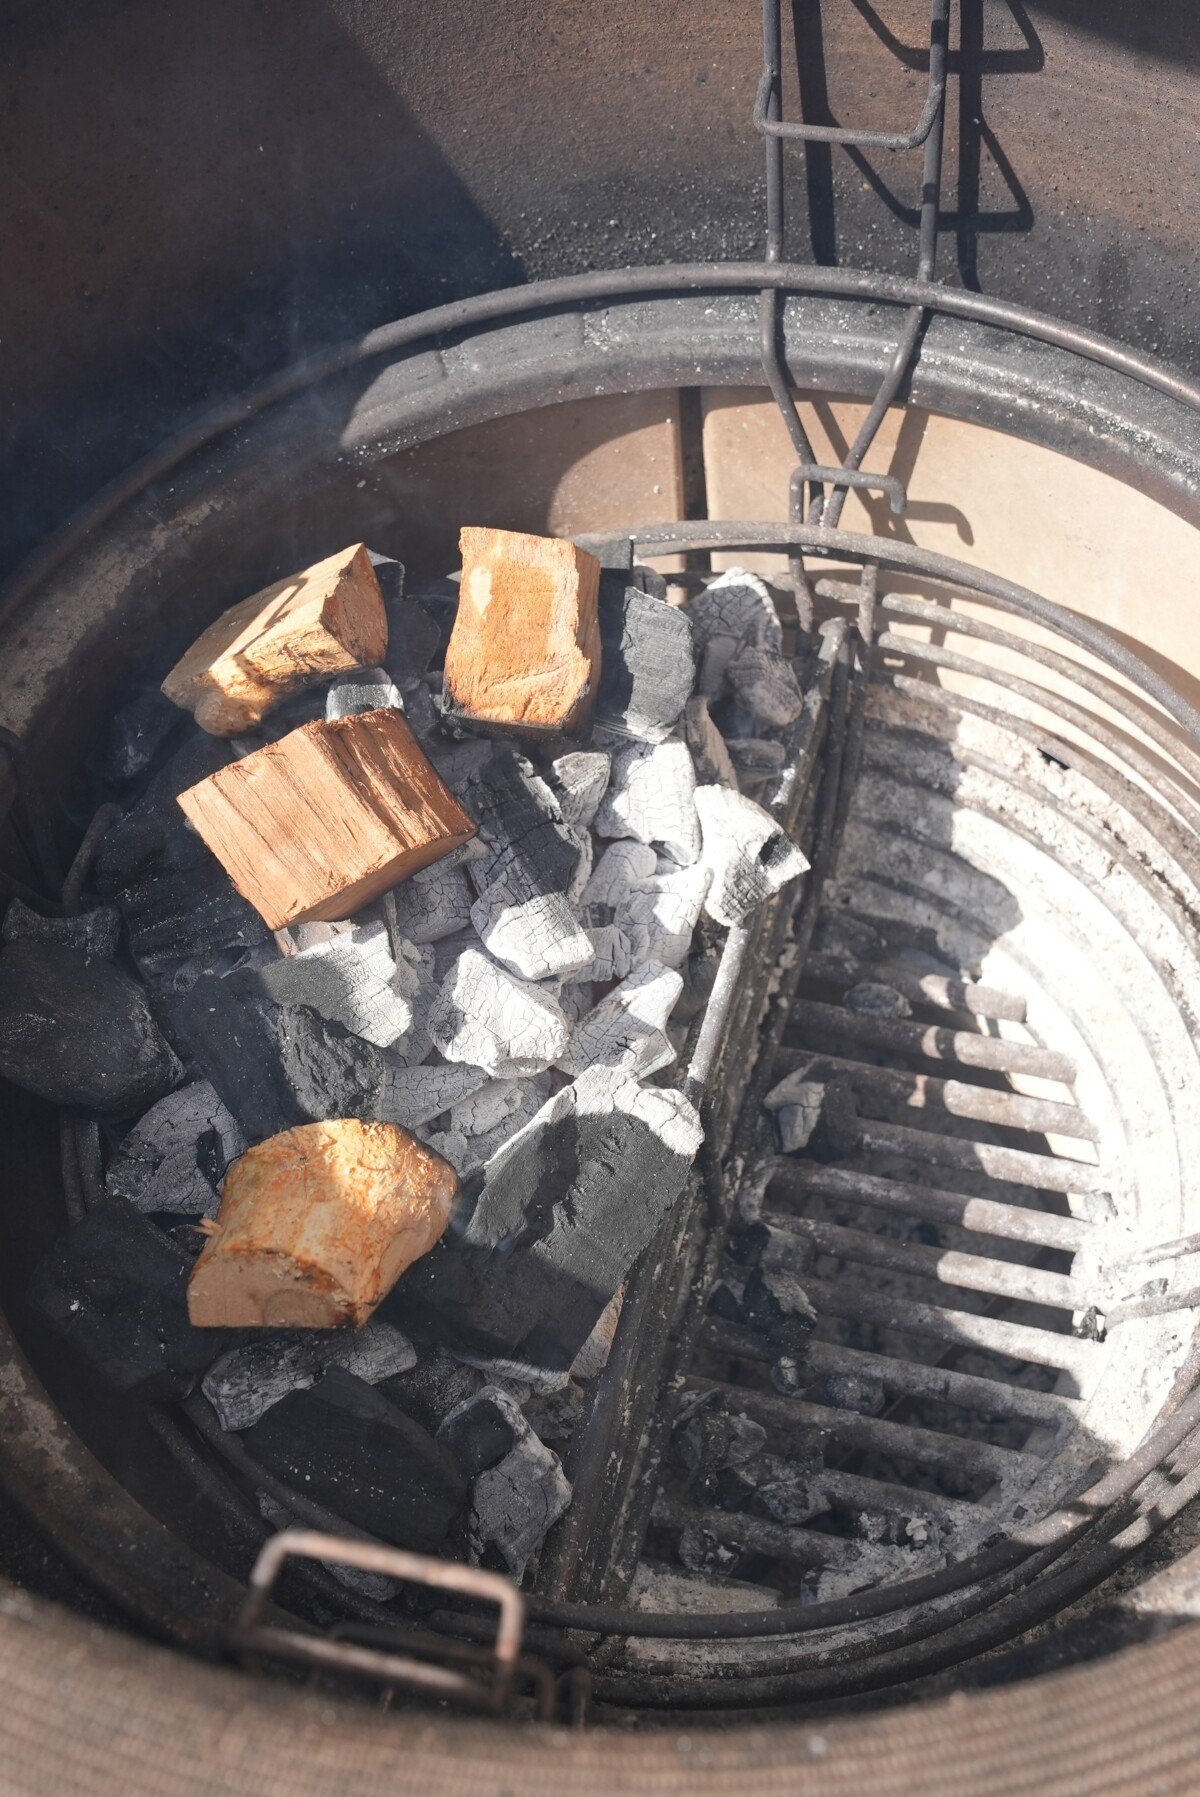 Charcoal on one side of the grill with cherry wood on top to create a direct and indirect heat zone.